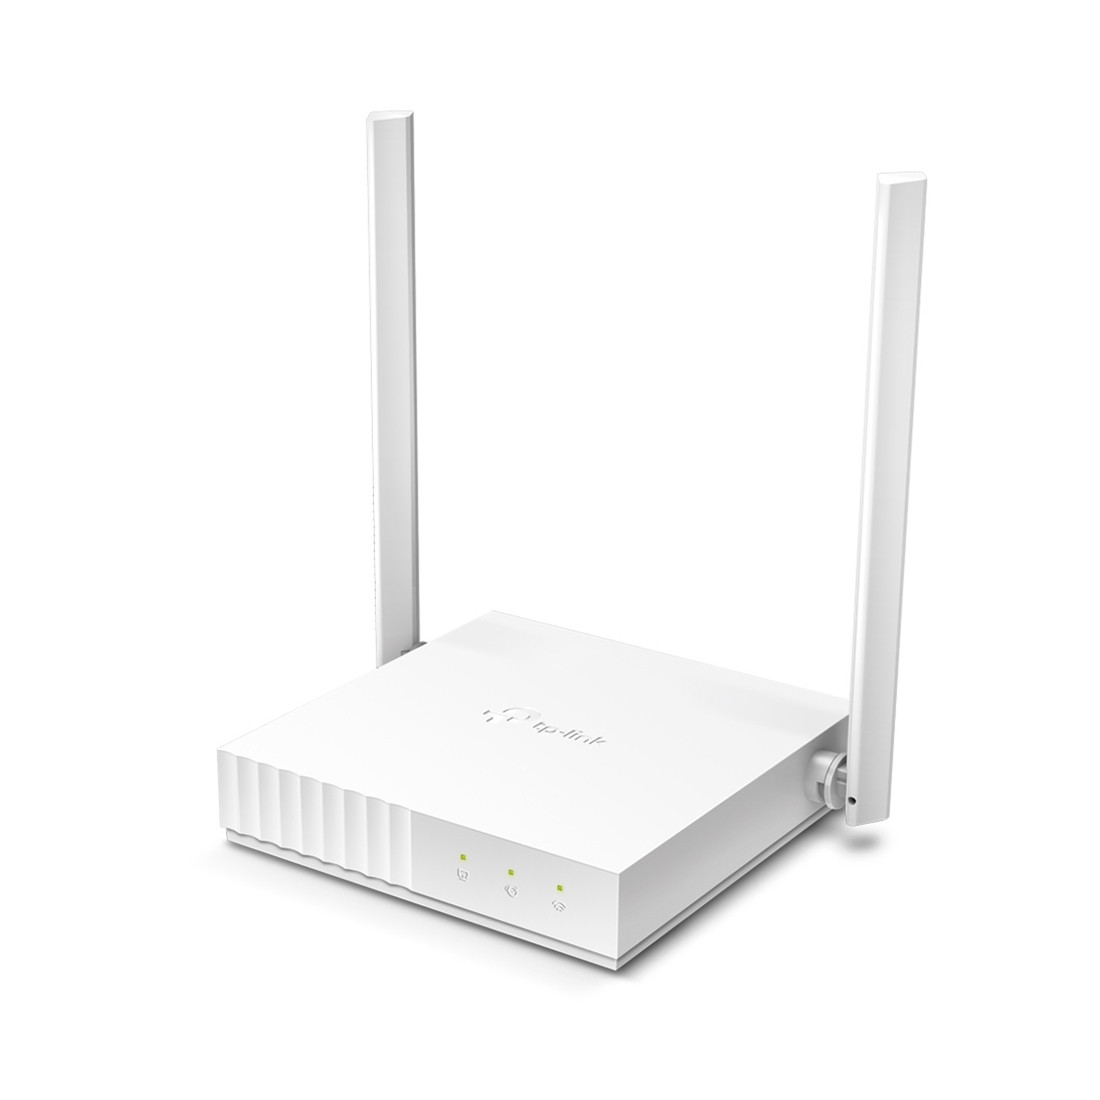 TP-Link TL-WR844N Маршрутизатор 300 Мбит/с